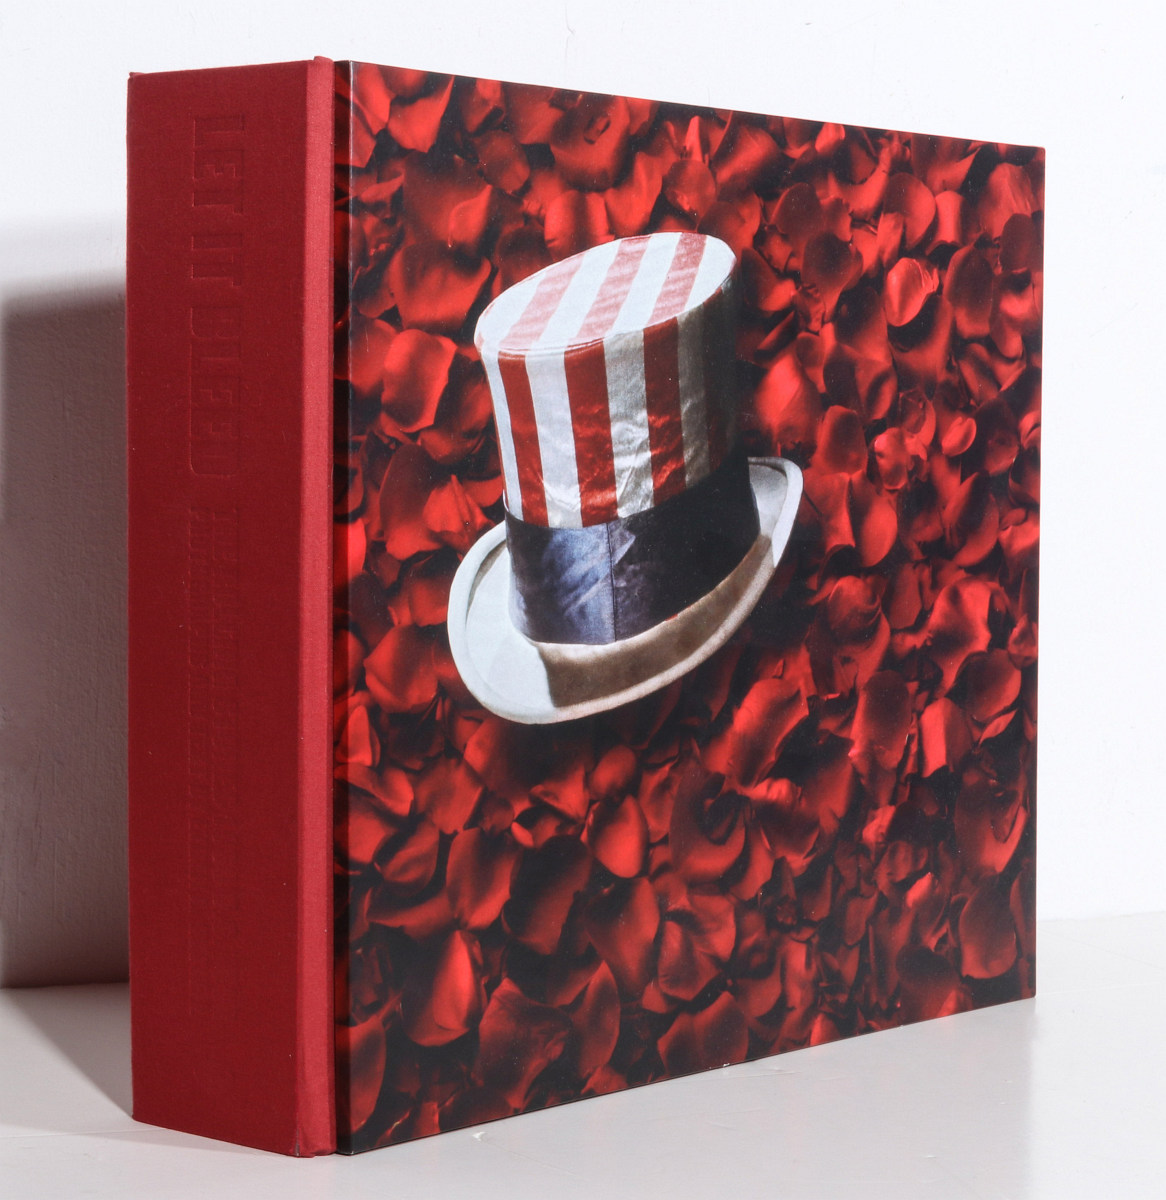 LIMITED EDITION BOOK ROLLING STONES 'LET IT BLEED'